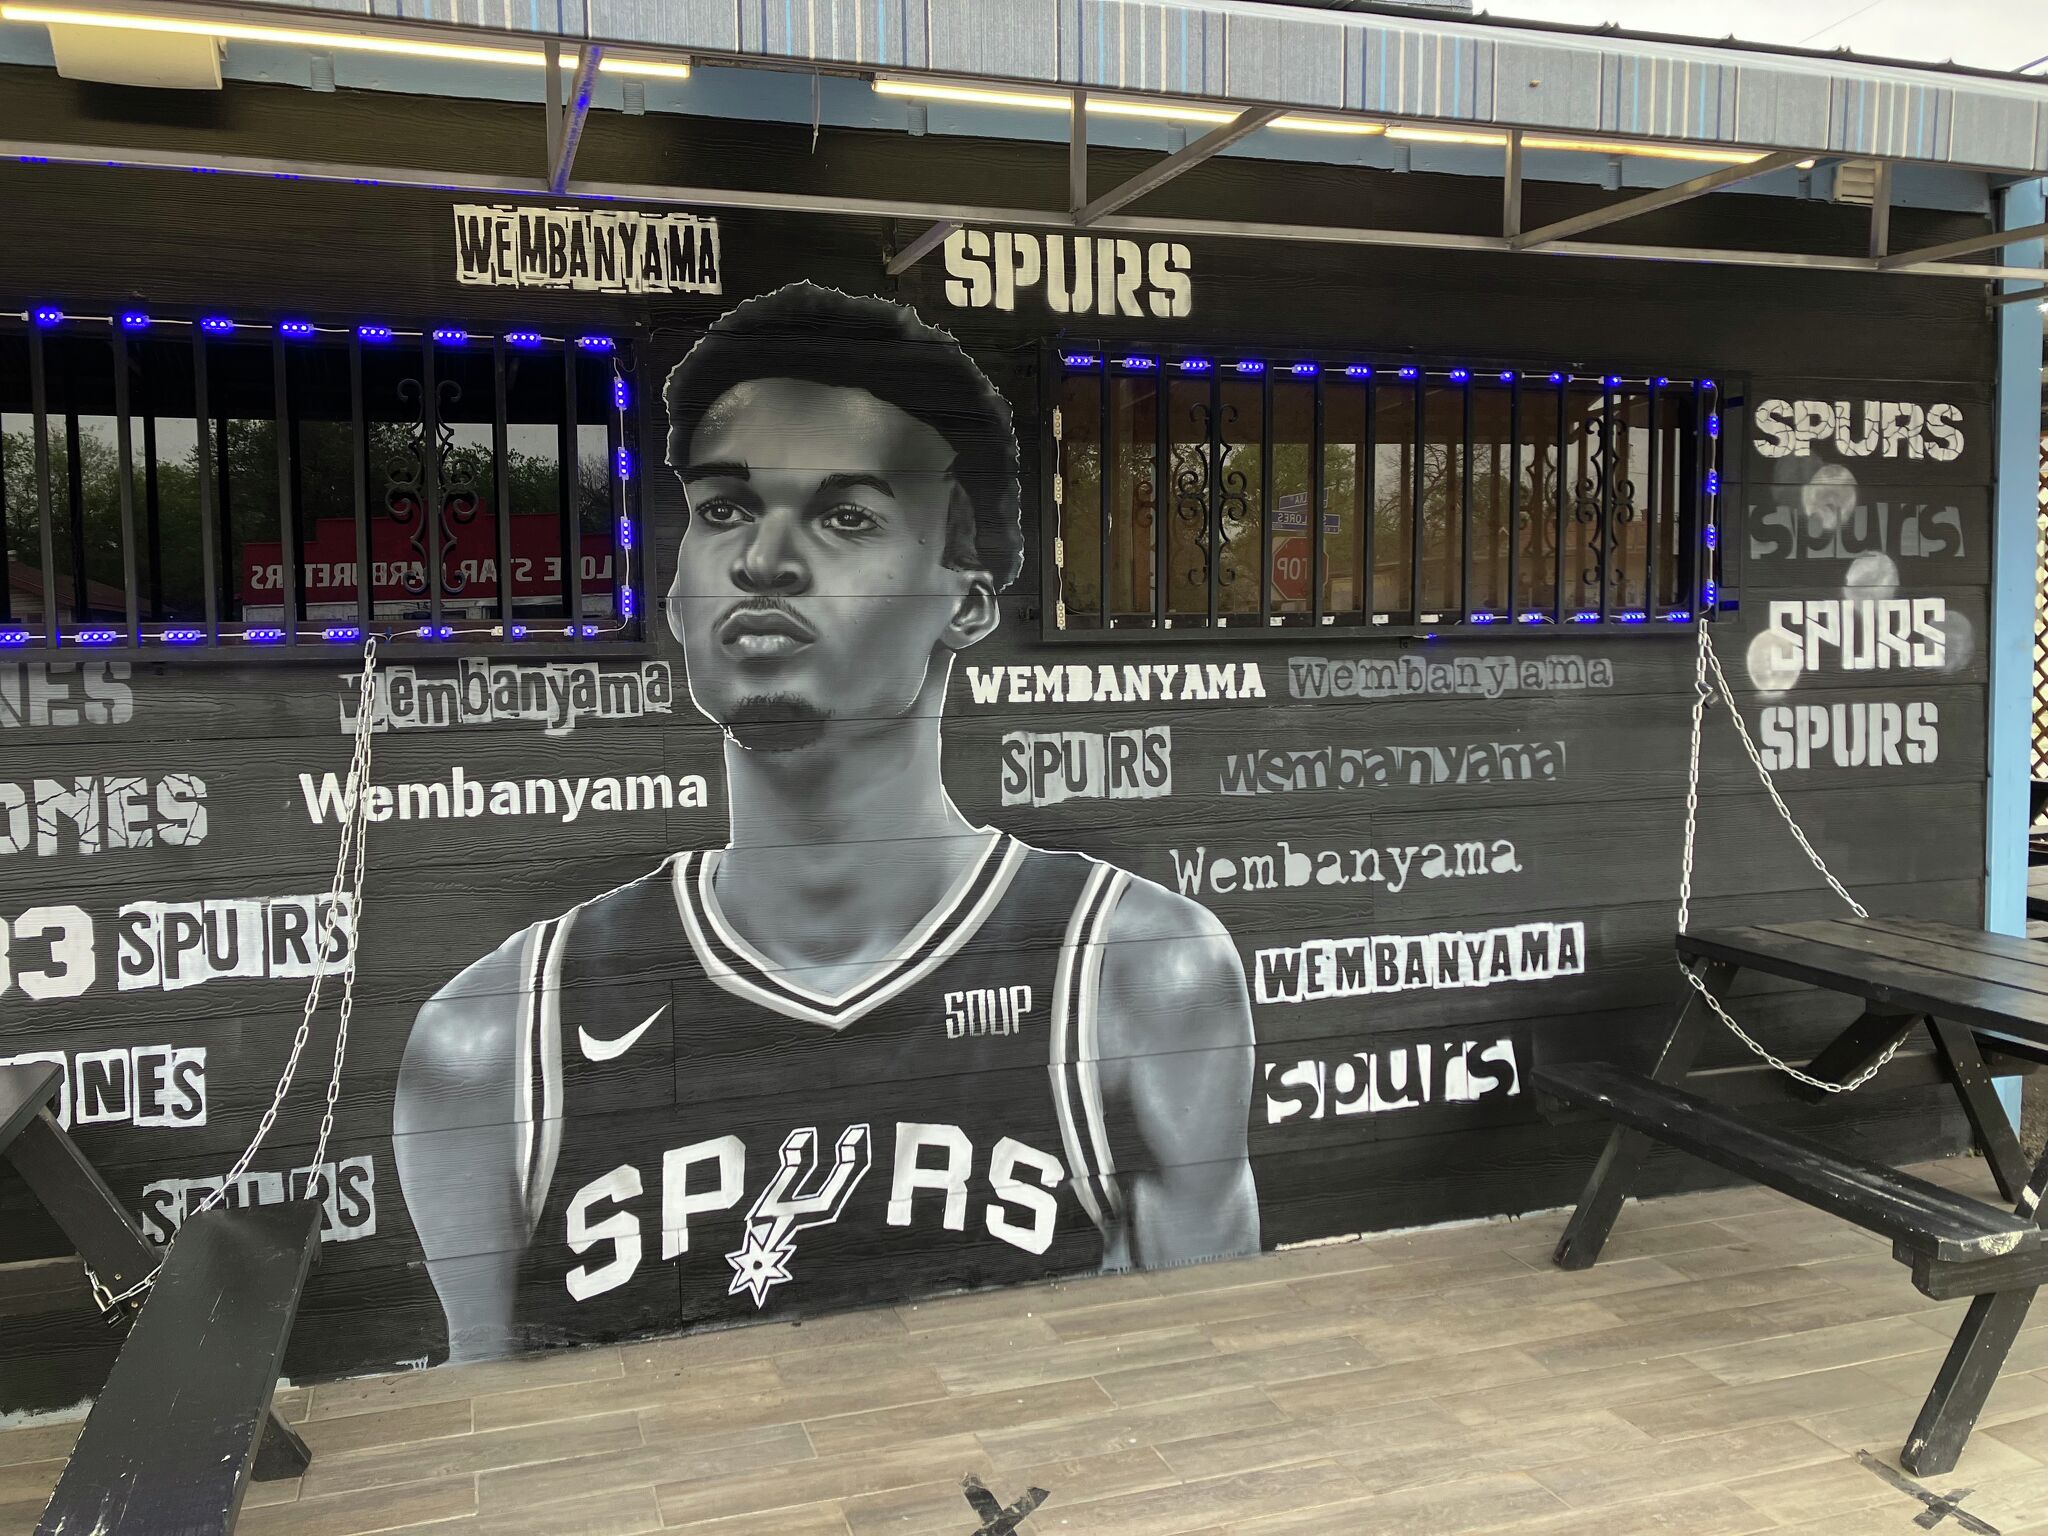 Building Victor Wembanyama: San Antonio Spurs Icon Tim Duncan To Help -  Sports Illustrated Inside The Spurs, Analysis and More